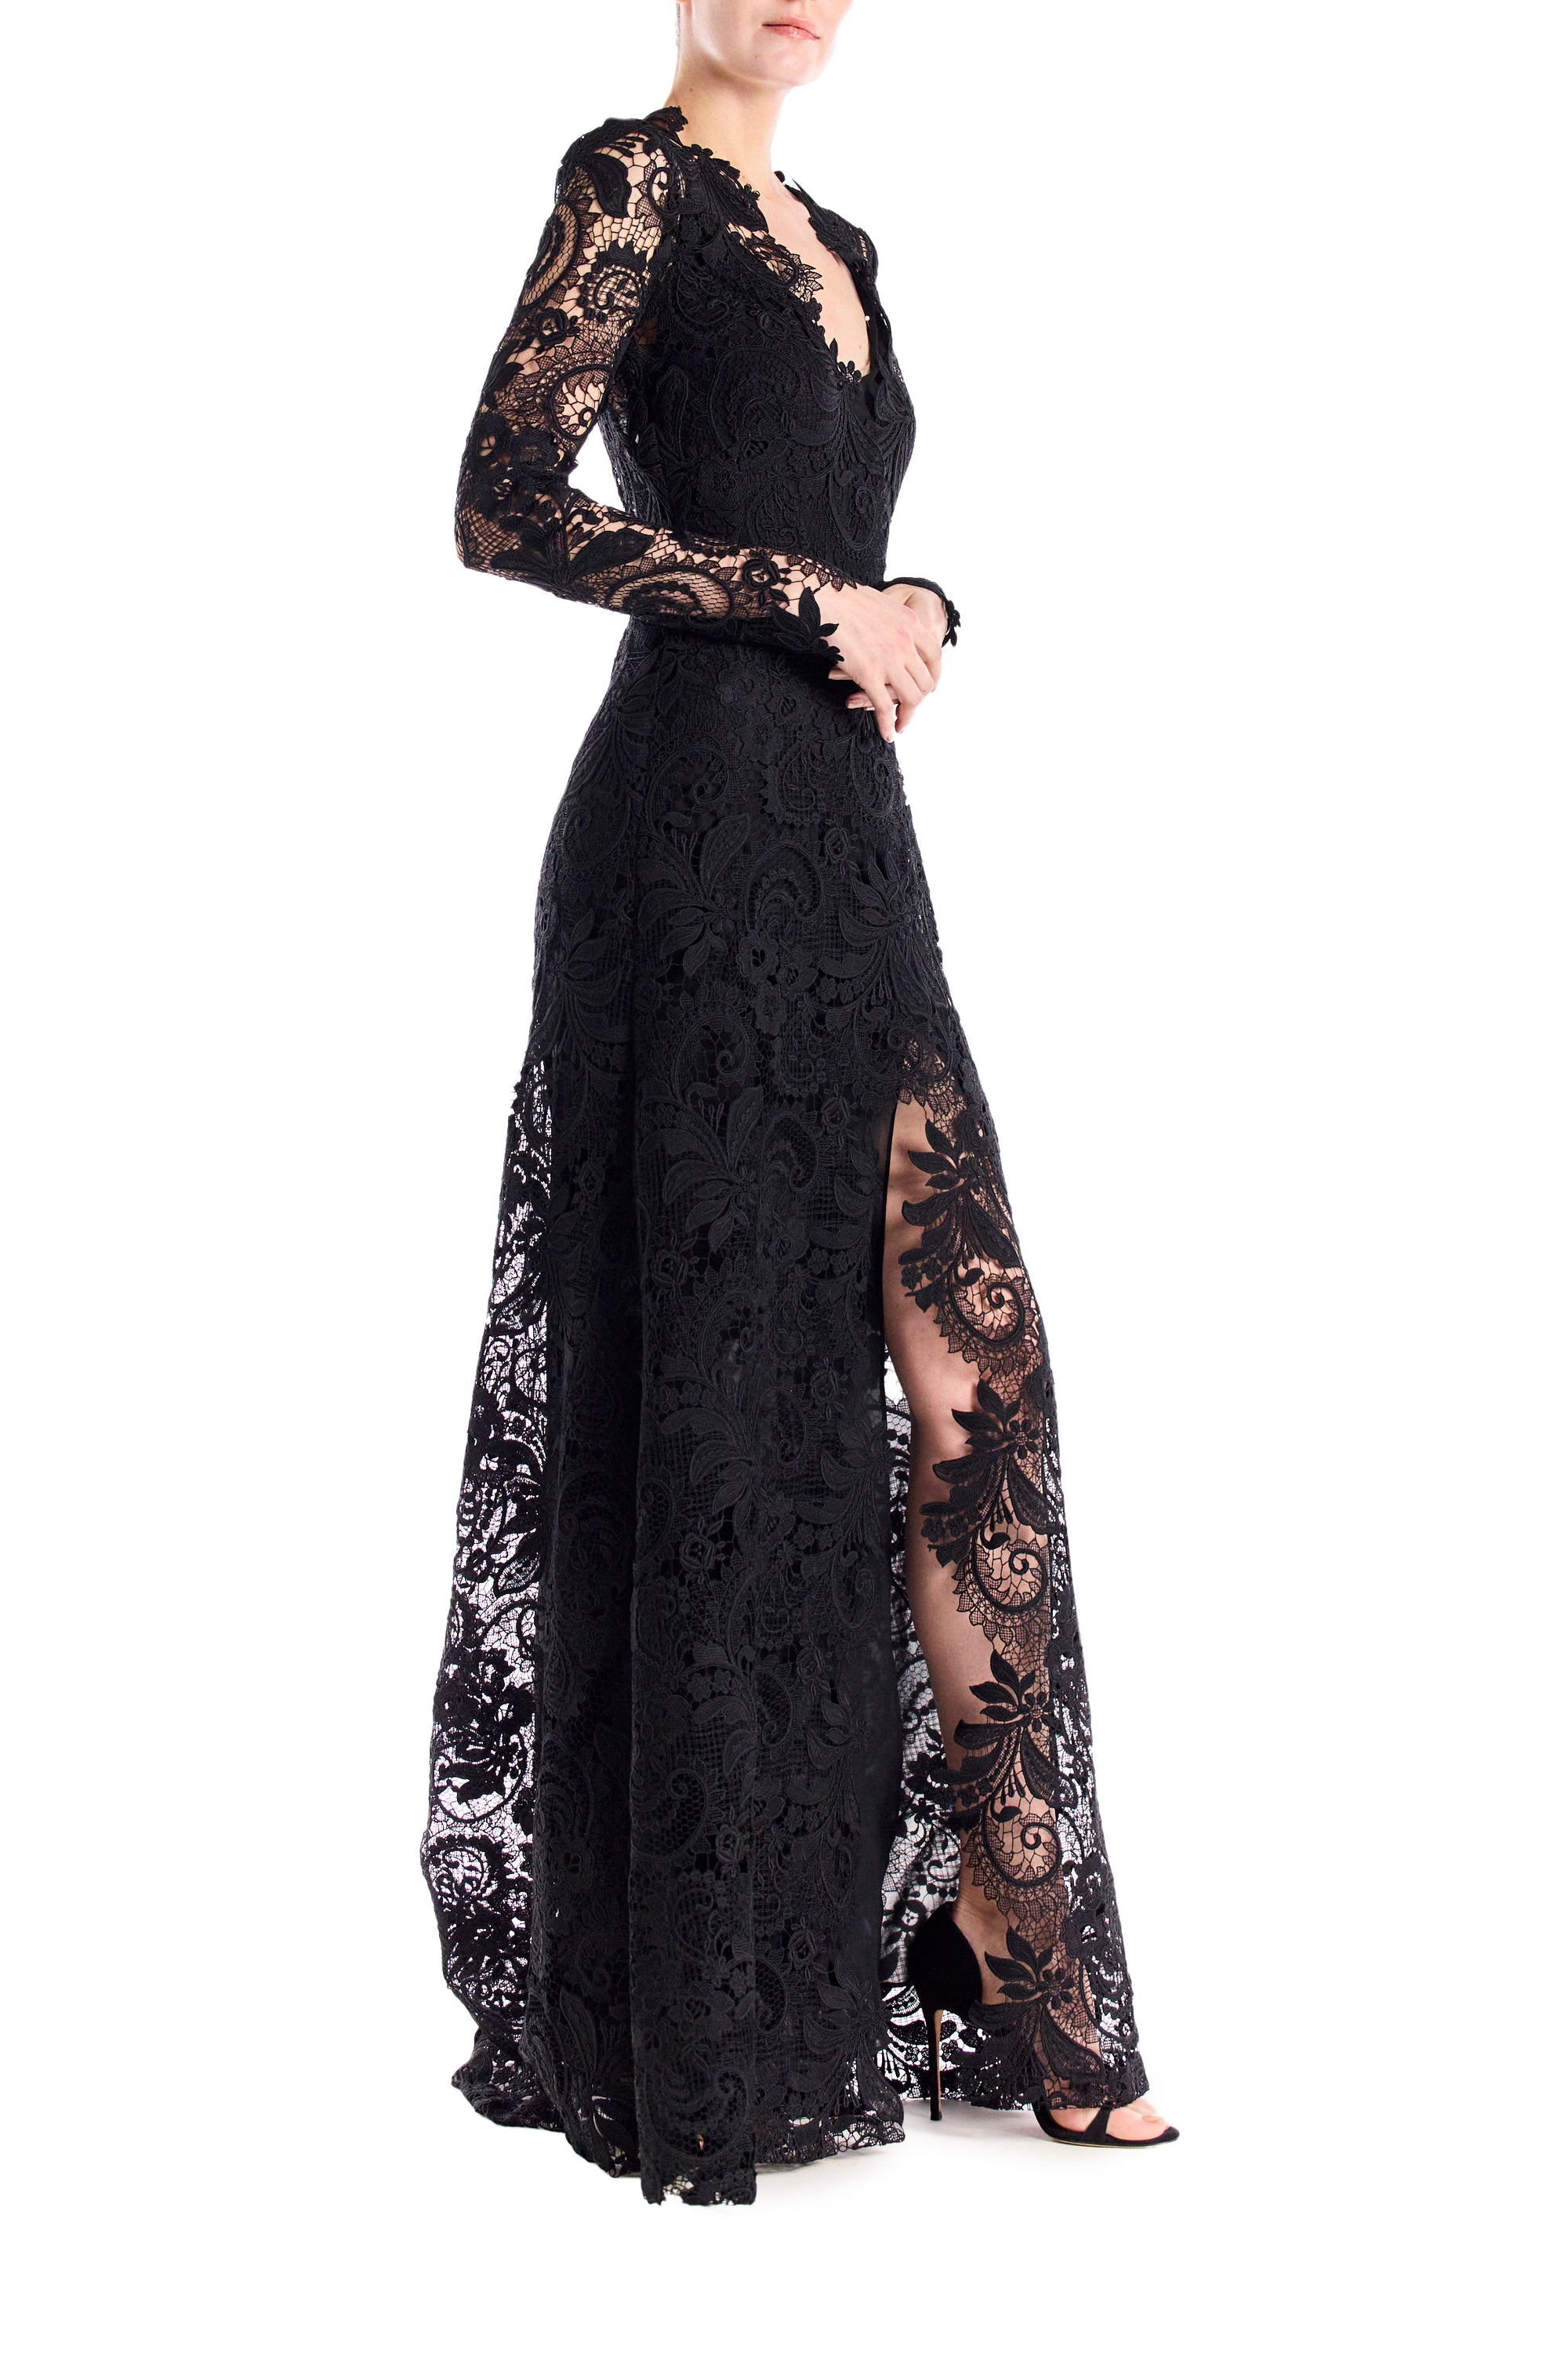 Monique Lhuillier long sleeve black lace gown with v-neck and high leg slit.